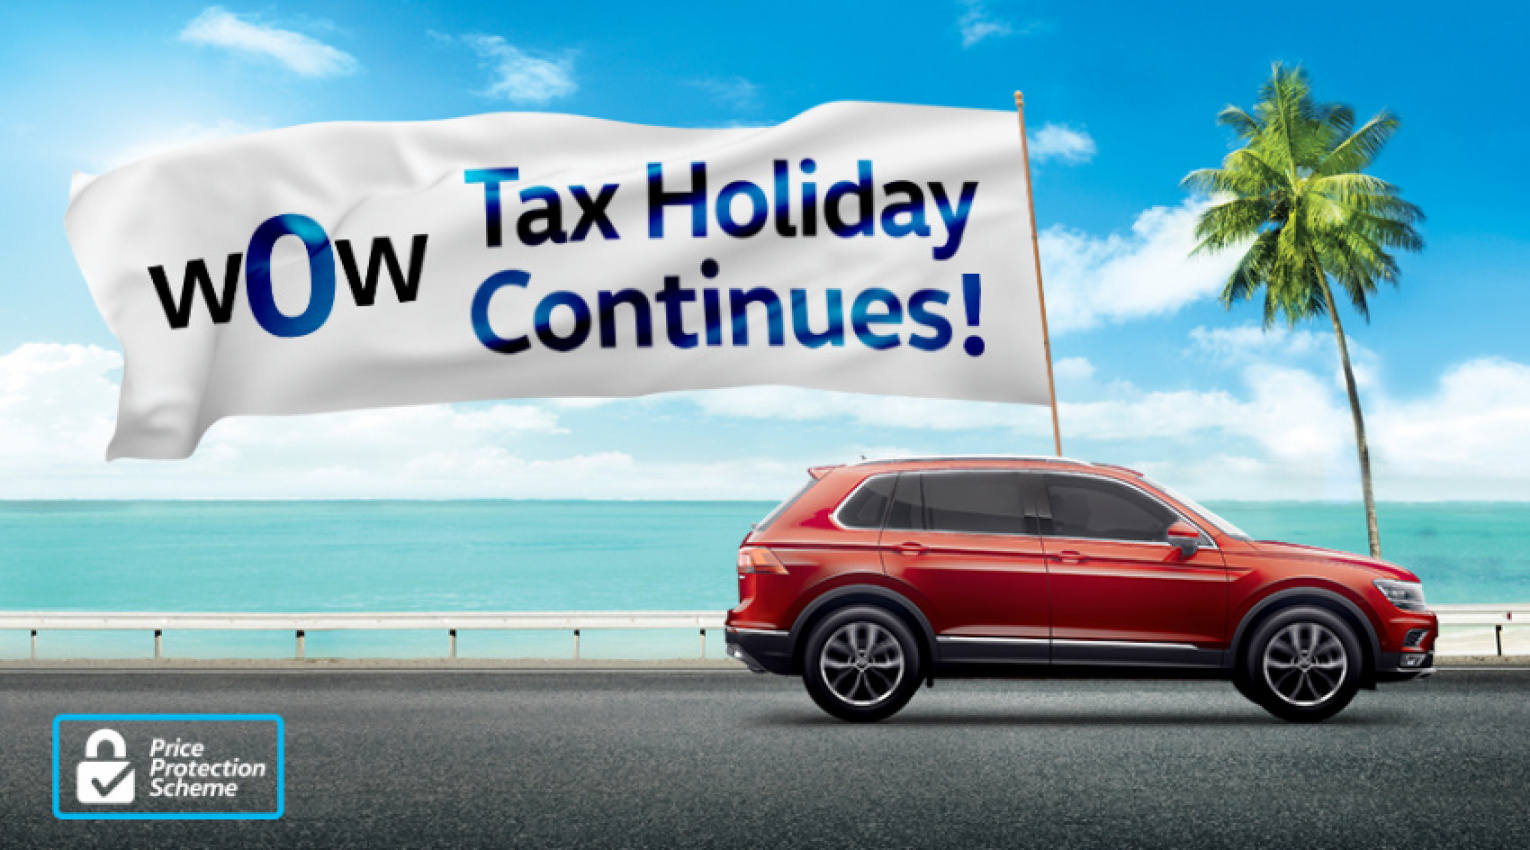 autos, car brands, cars, volkswagen, malaysia, volkswagen passenger cars malaysia, vpcm, volkswagen vehicles in malaysia get extended tax holiday with the price protection scheme